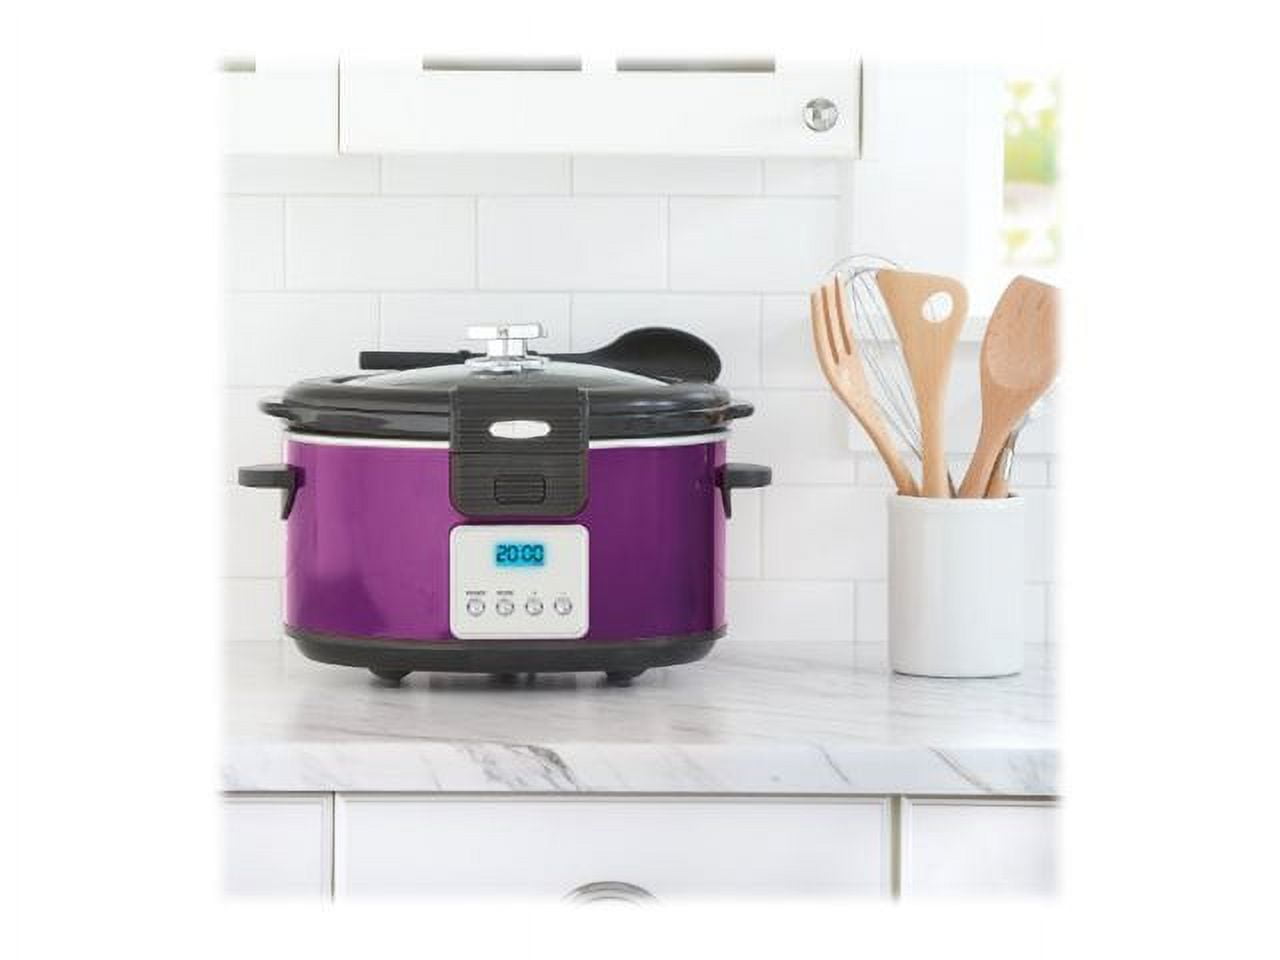 BELLA 5 Quart Programmable Slow Cooker with Timer, Polished